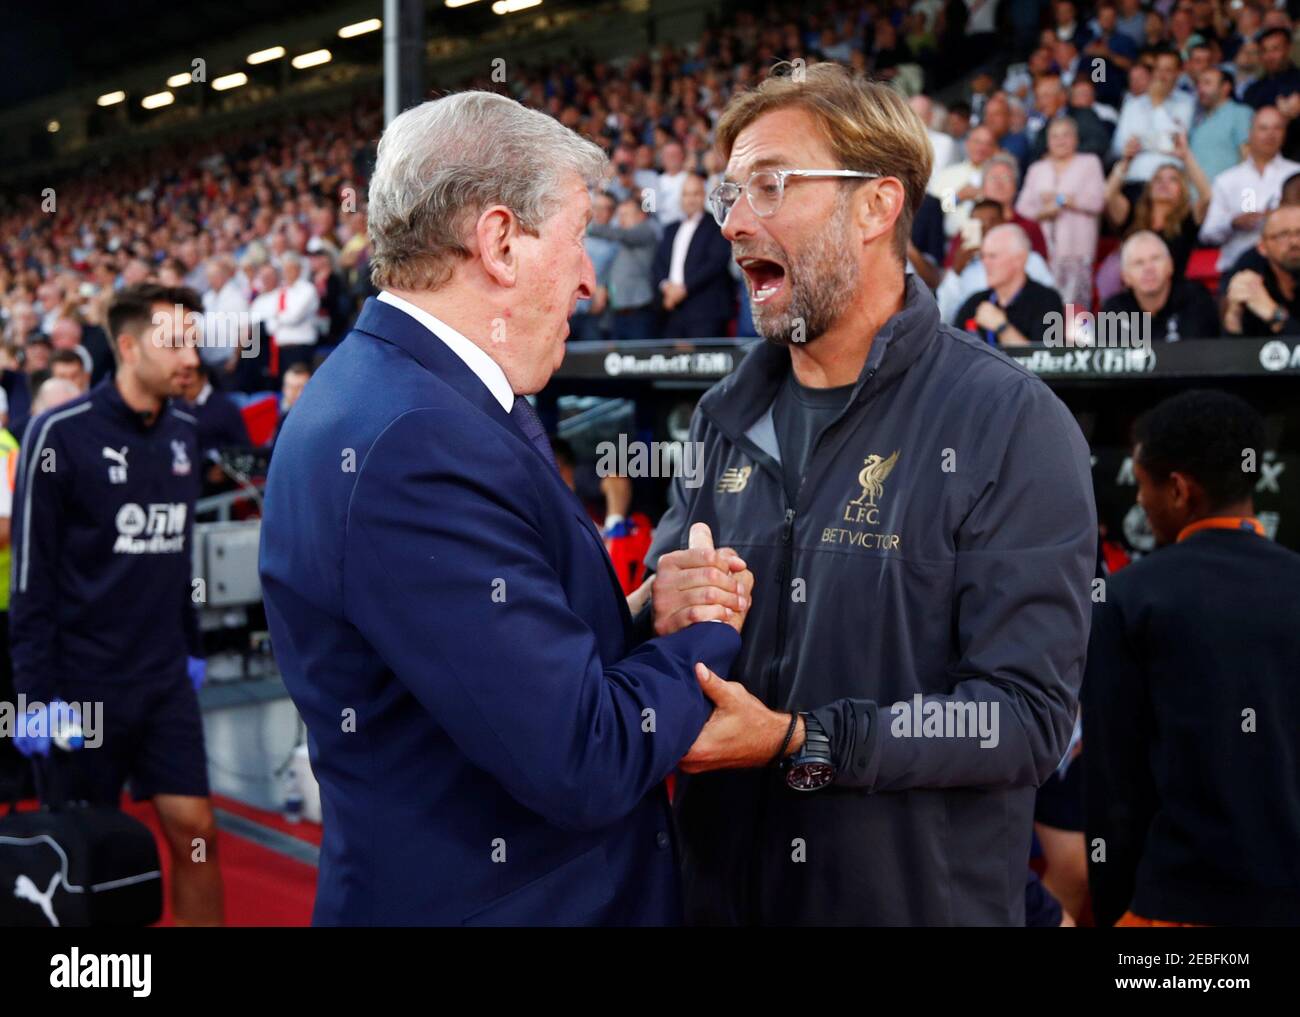 Soccer Football - Premier League - Crystal Palace v Liverpool - Selhurst Park, London, Britain - August 20, 2018  Crystal Palace manager Roy Hodgson with Liverpool manager Juergen Klopp before the match             REUTERS/Eddie Keogh  EDITORIAL USE ONLY. No use with unauthorized audio, video, data, fixture lists, club/league logos or "live" services. Online in-match use limited to 75 images, no video emulation. No use in betting, games or single club/league/player publications.  Please contact your account representative for further details. Stock Photo